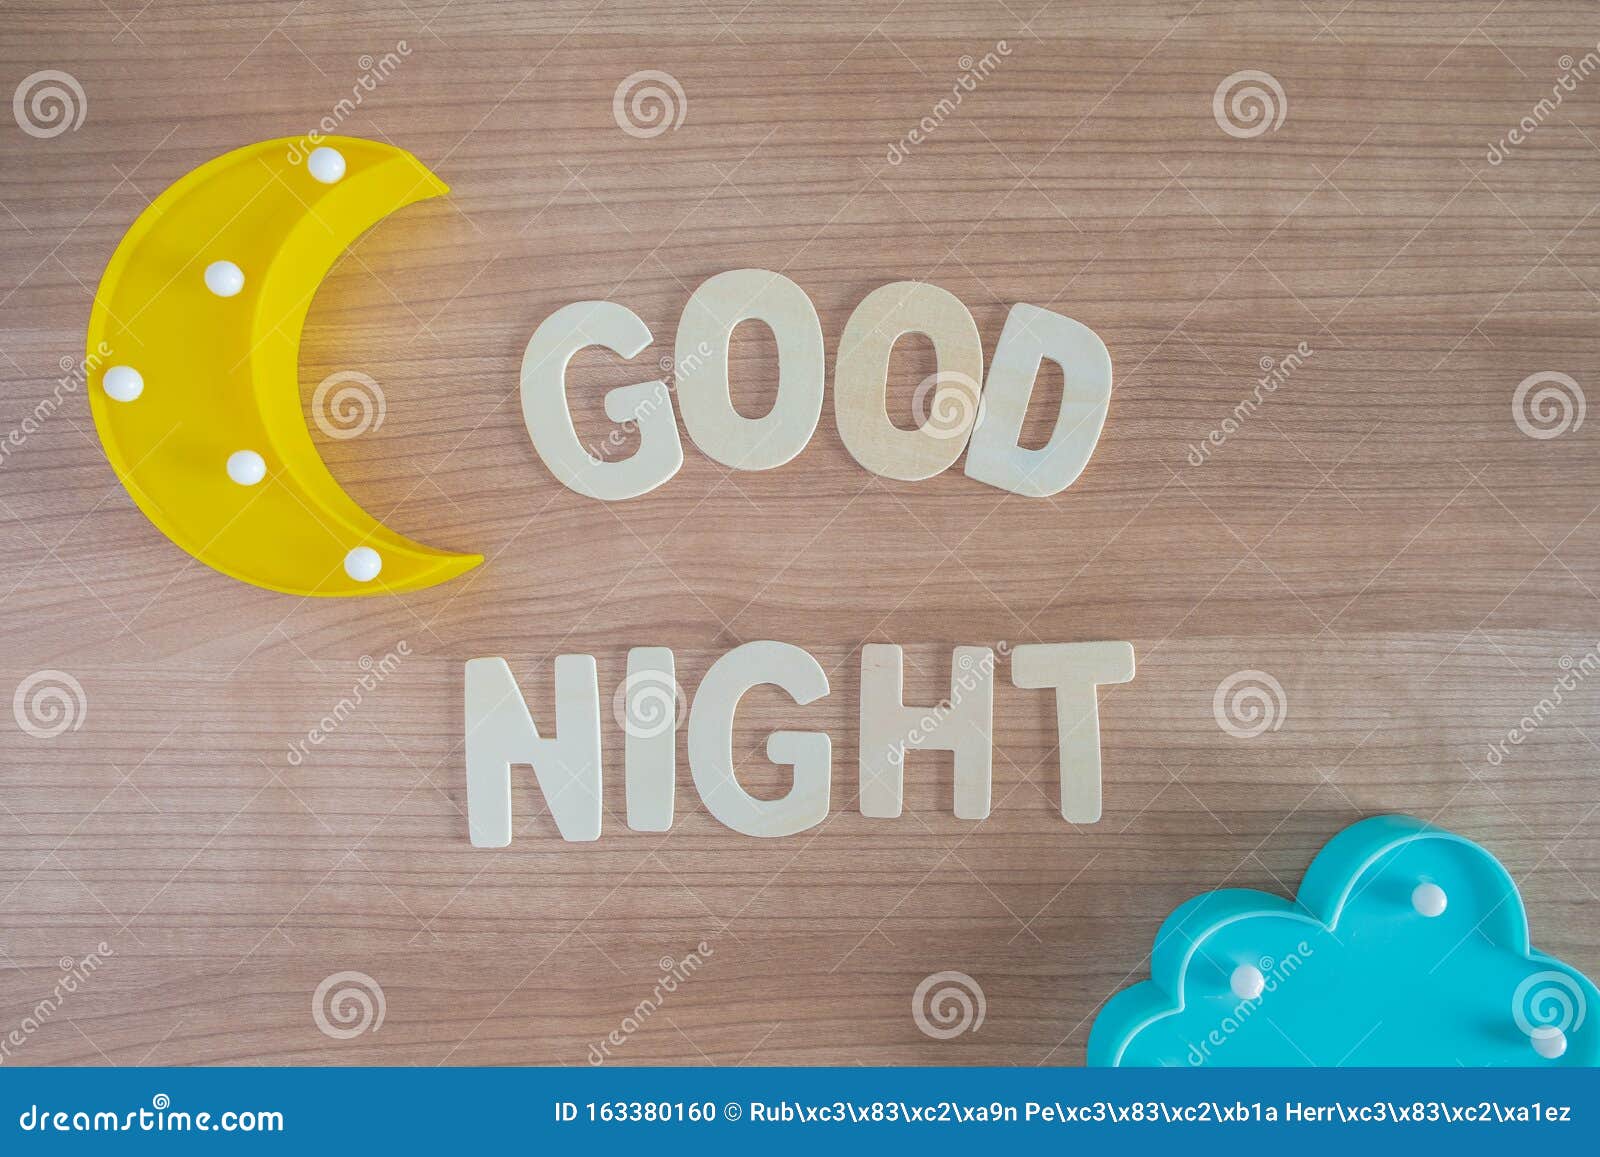 Good Night Words with Wood Letters Over Wood Background Stock Photo ...